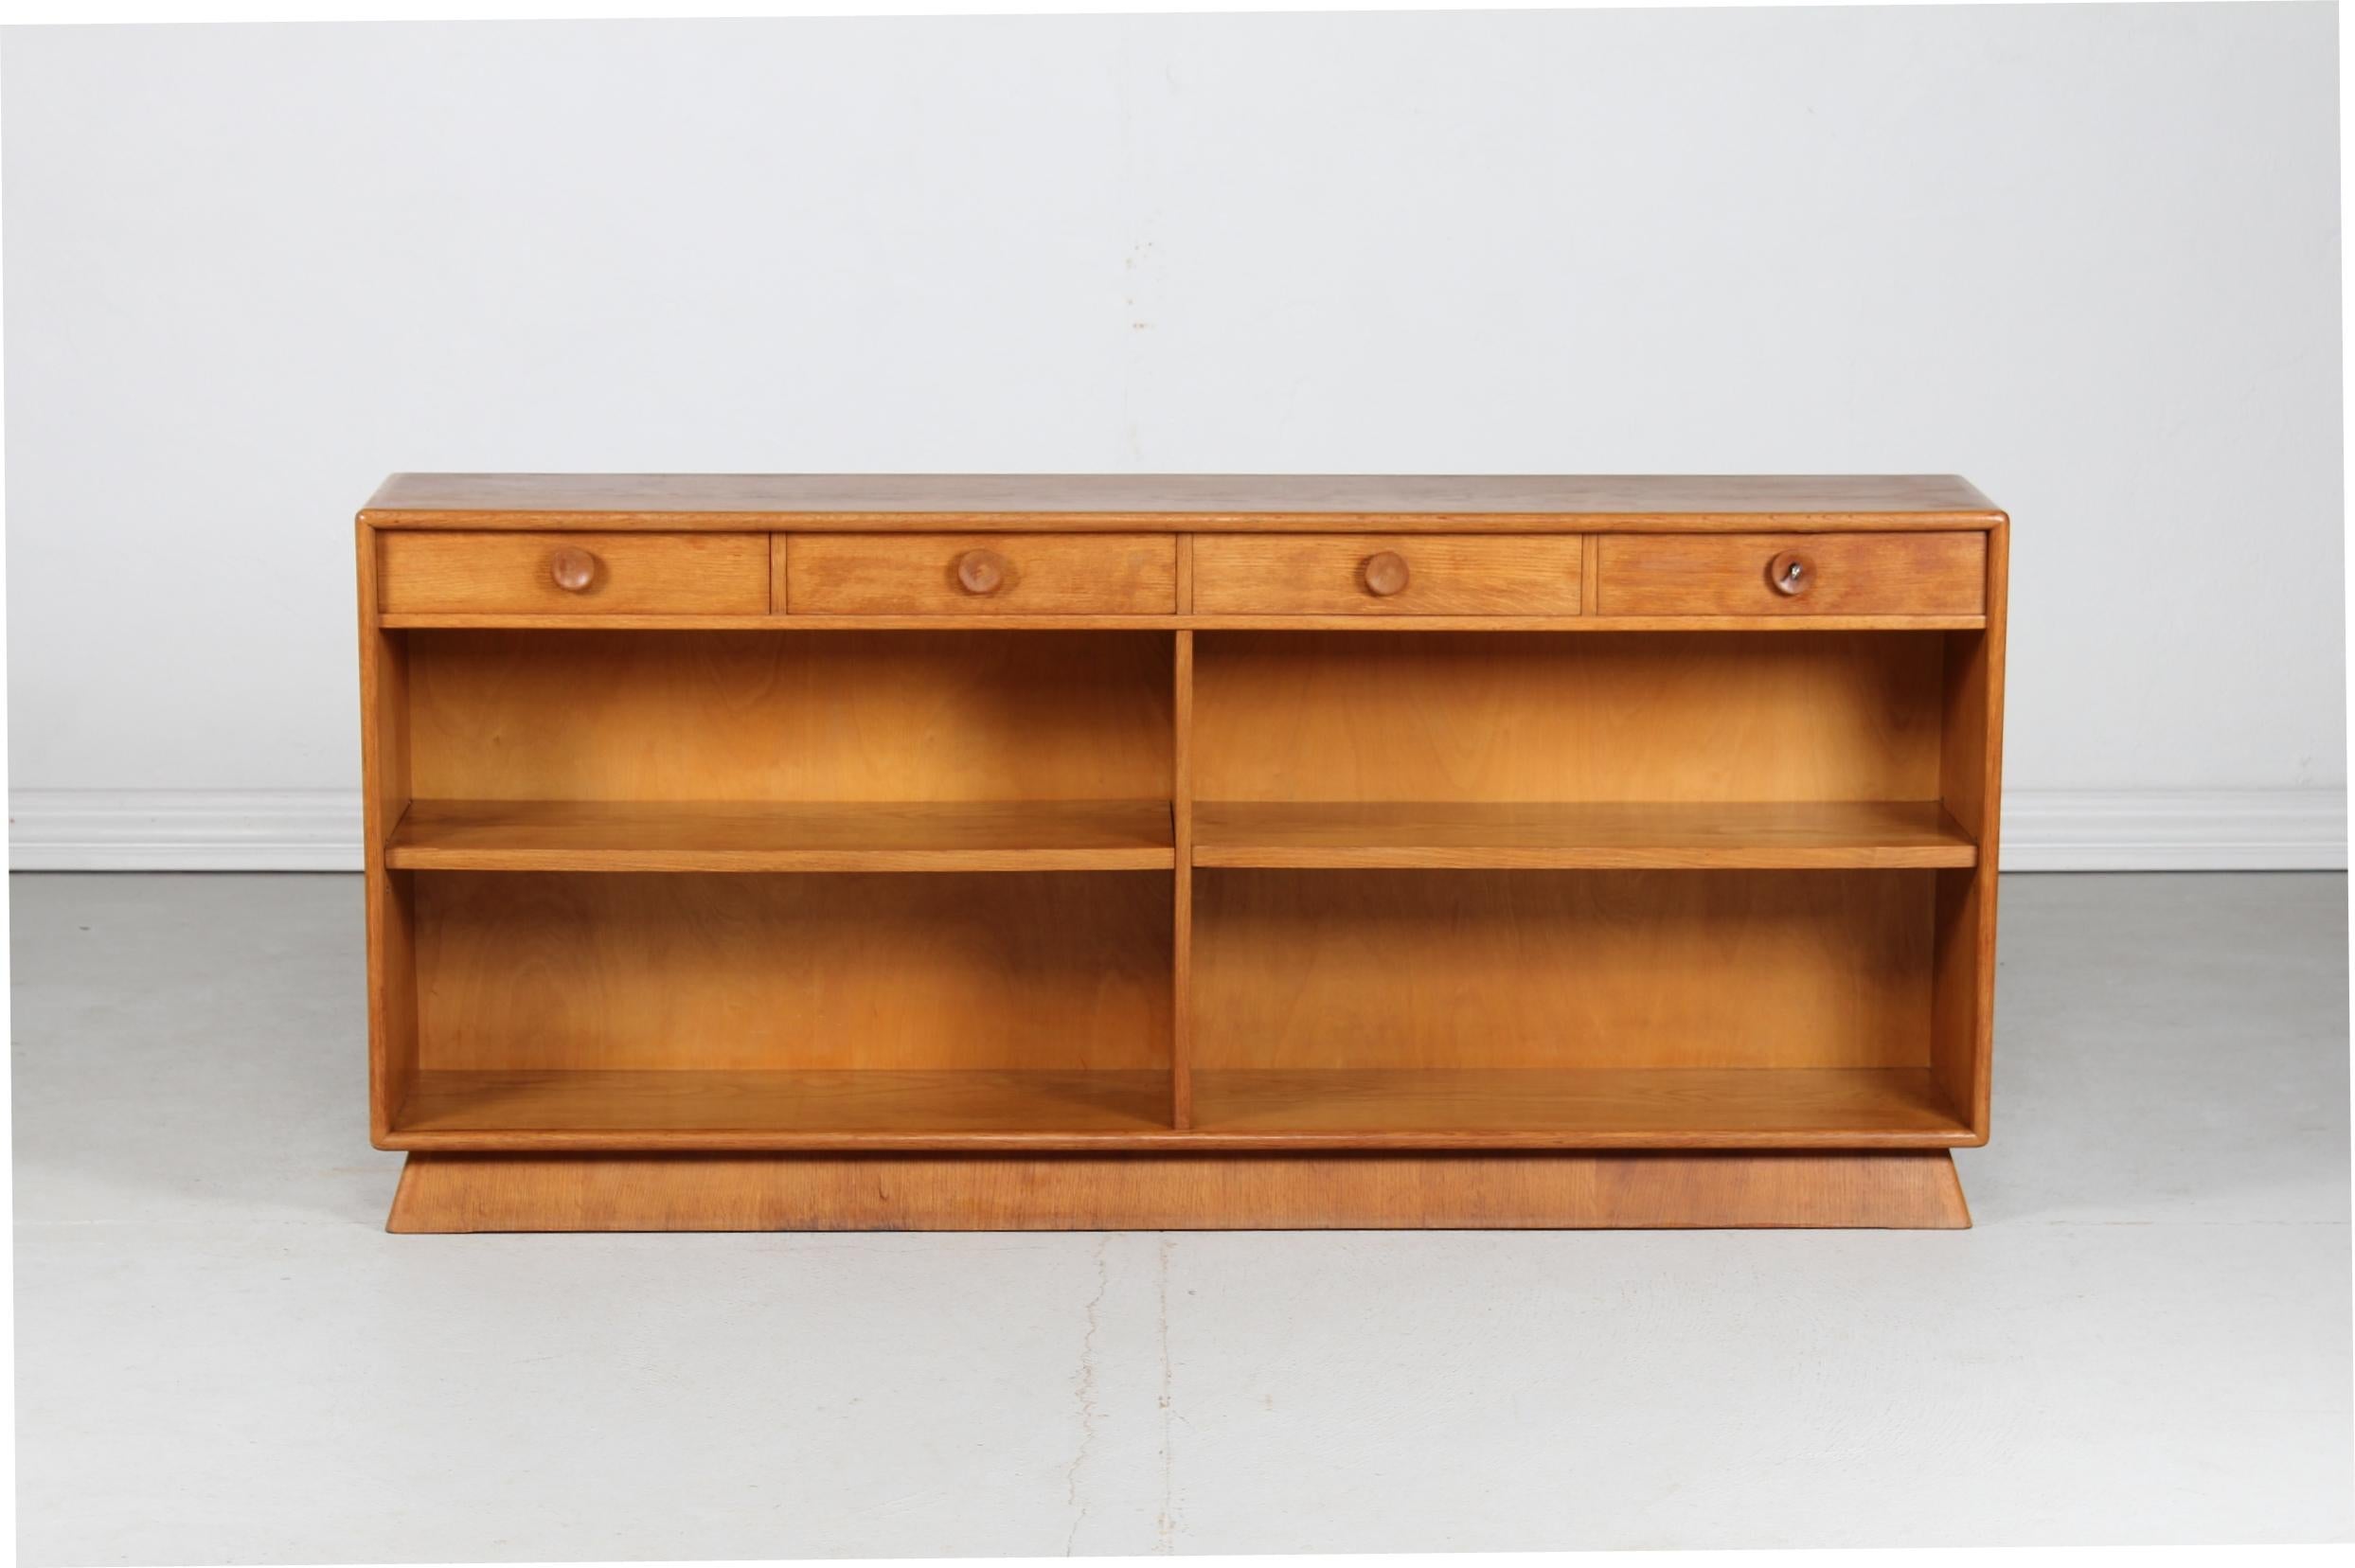 Danish Art Deco bookcase with 4 drawers, one with lock and key.
The bookcase is designed and made by a Danish furniture maker in the 1940s 
I'ts made of oak, solid and veneer with patina.

Nice vintage condition with few signs of time and use.





